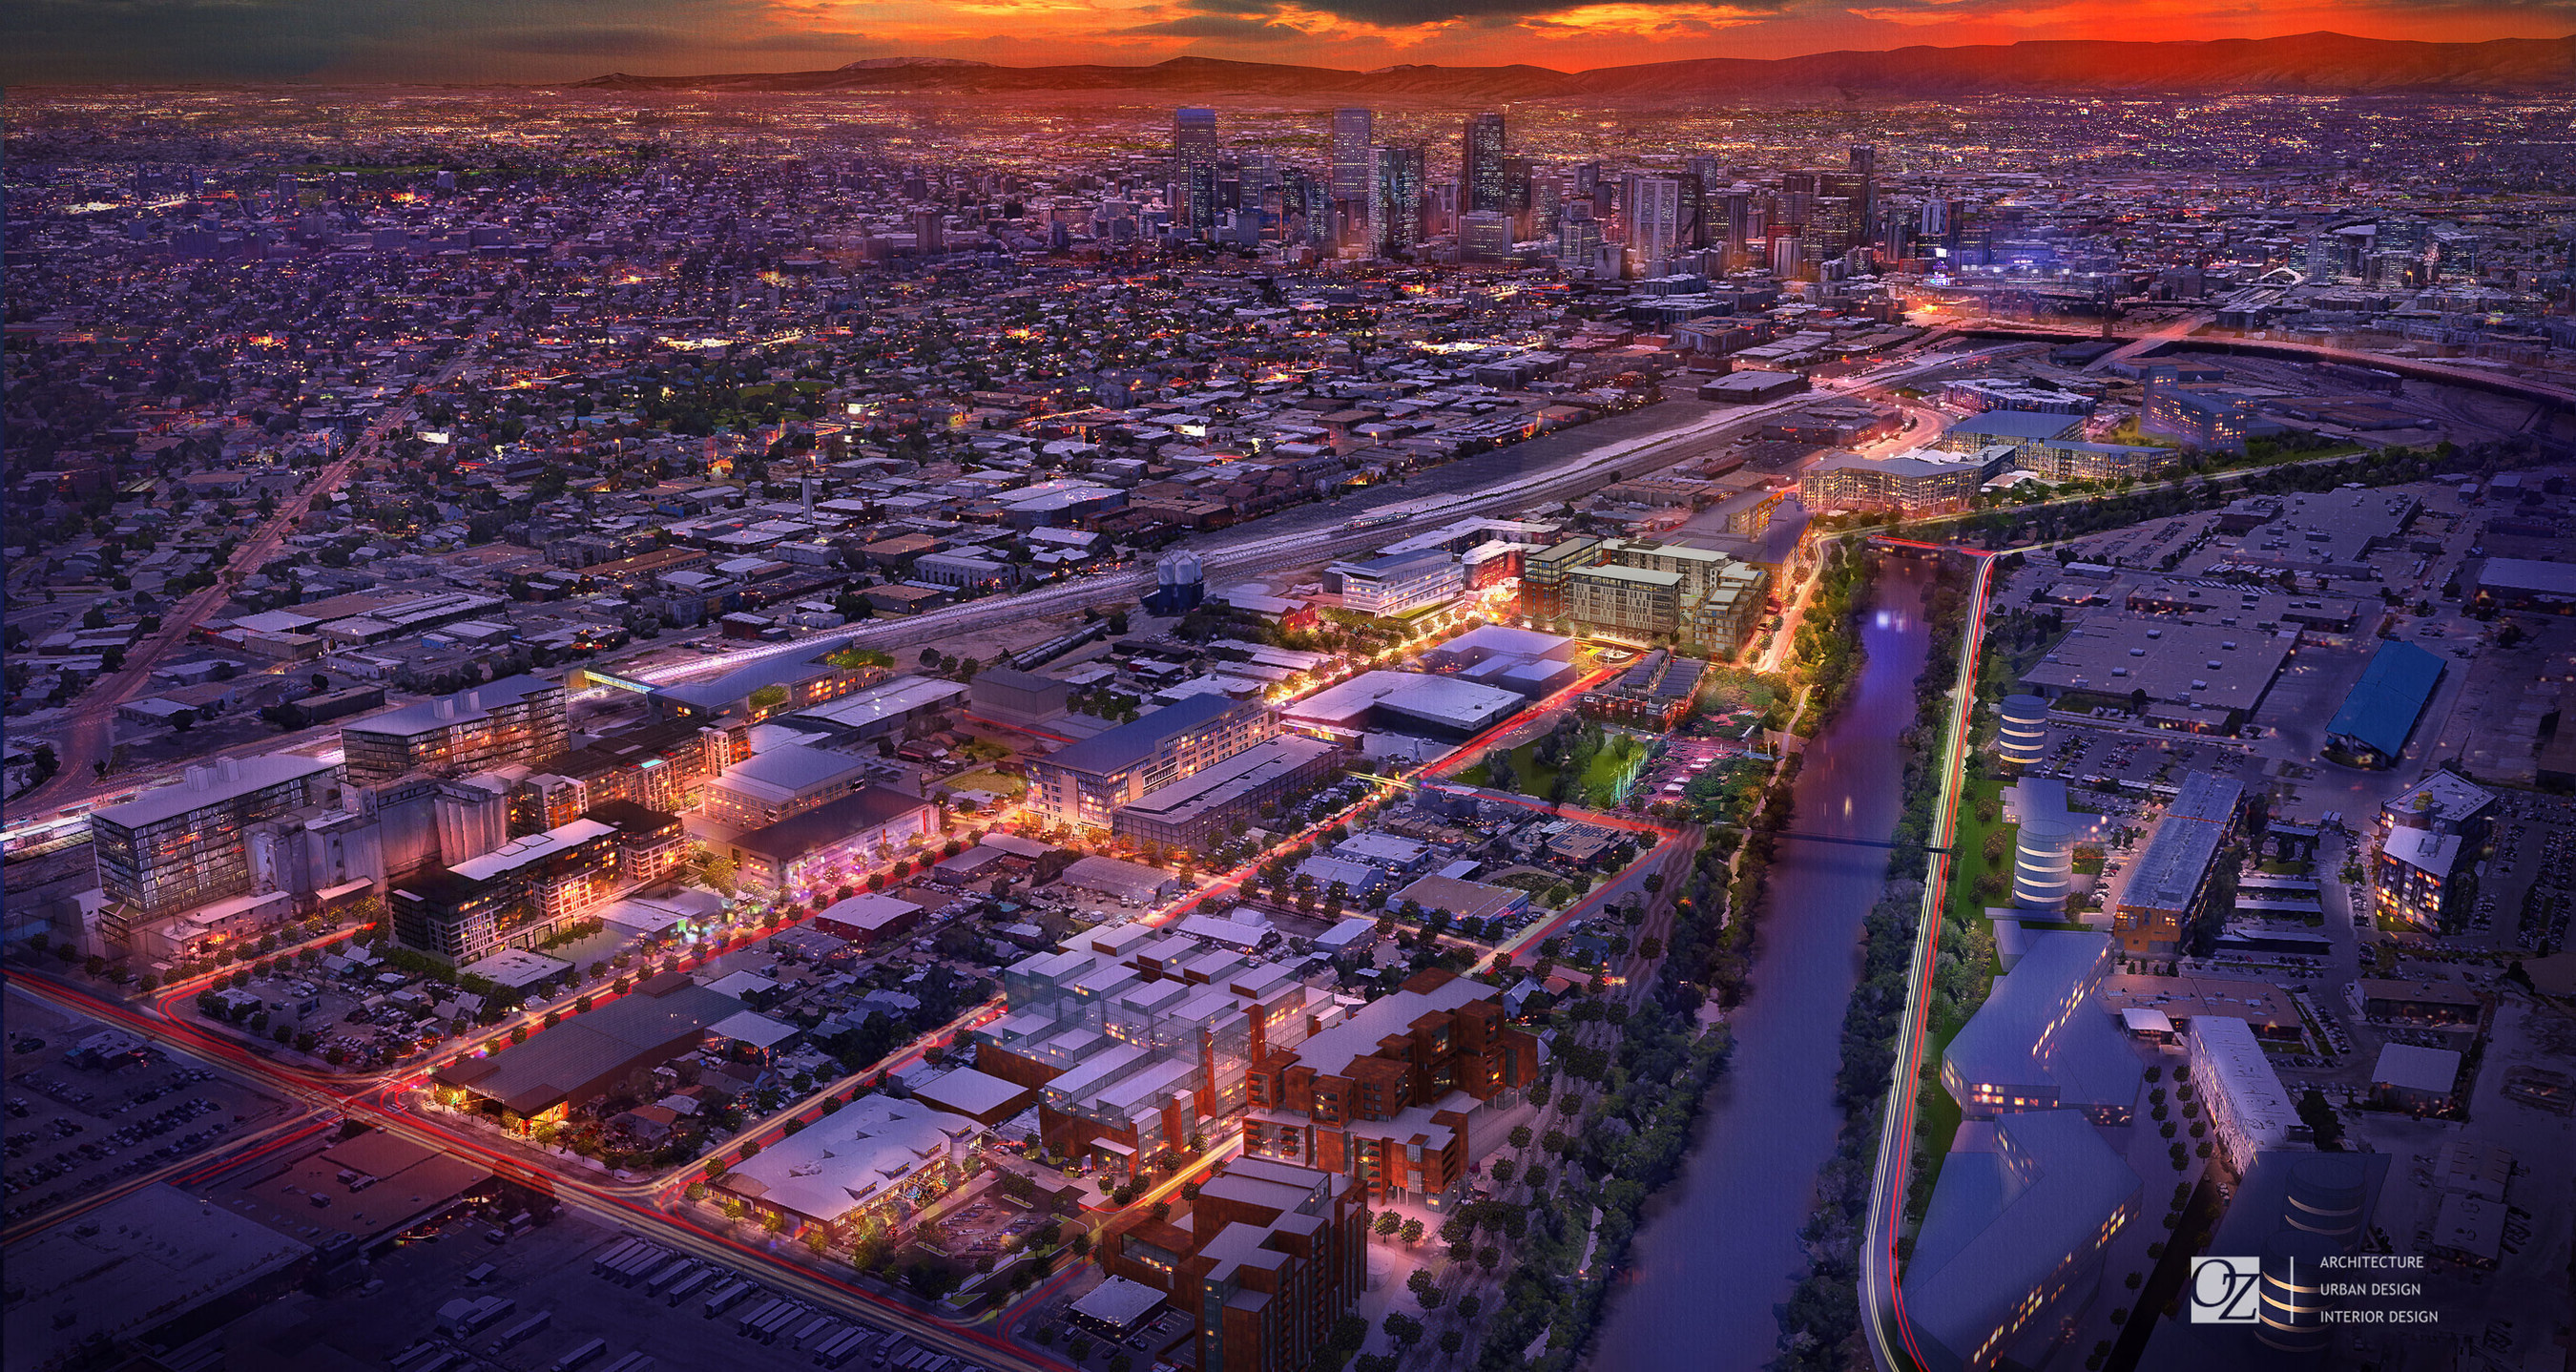 RiNo Denver image shows what the area is envisioned to look like in 2020. OZ Architecture worked with a variety of designers and developers to compile the integrated rendering.